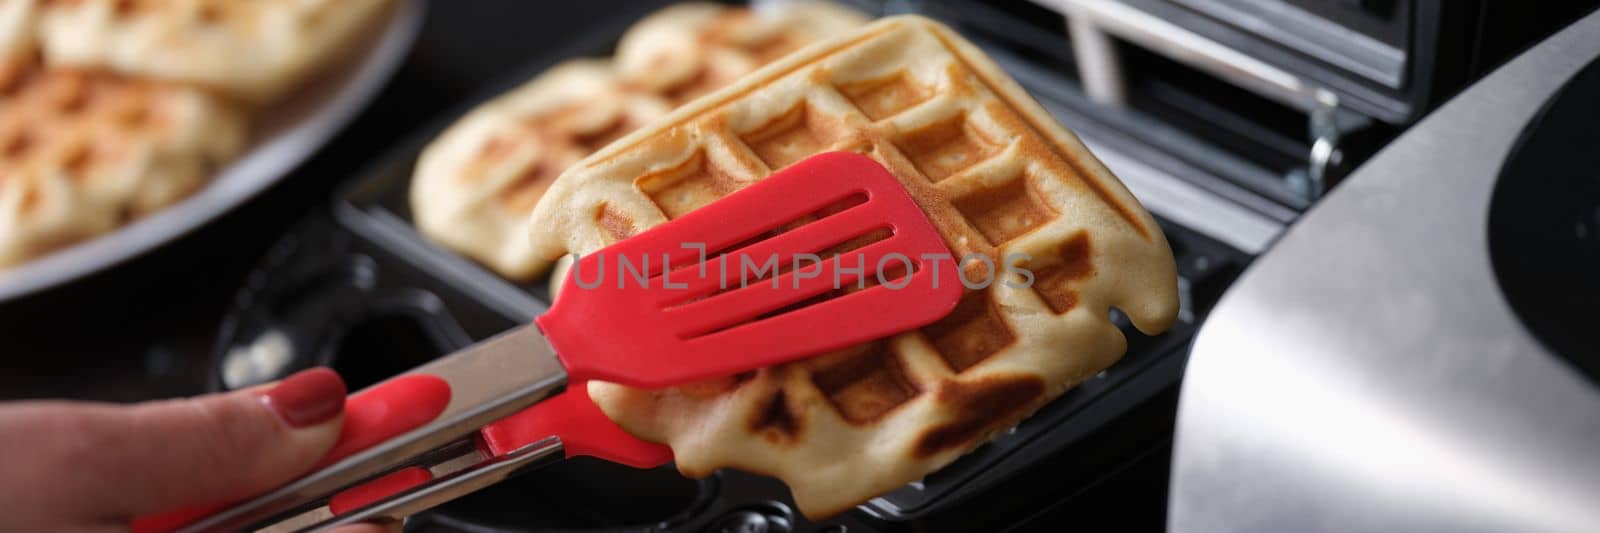 Pastry chef takes hot waffles from waffle iron in kitchen by kuprevich